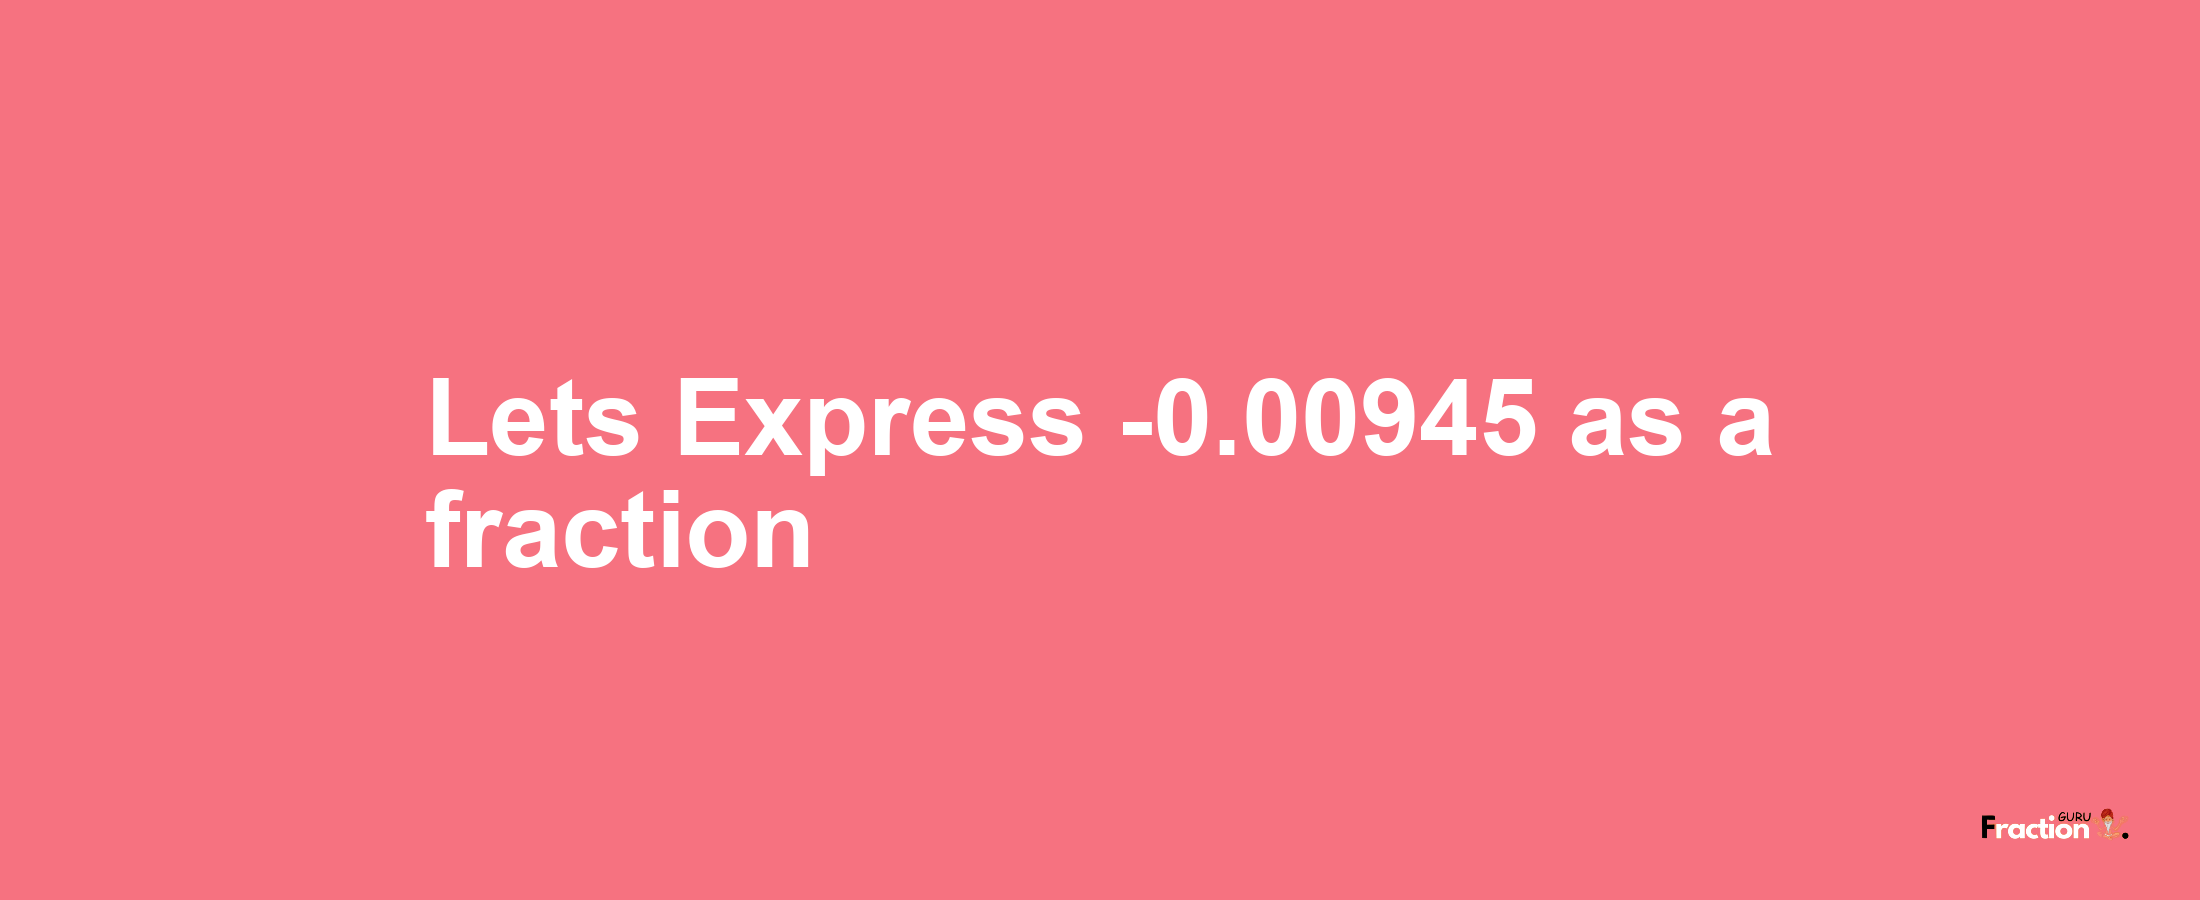 Lets Express -0.00945 as afraction